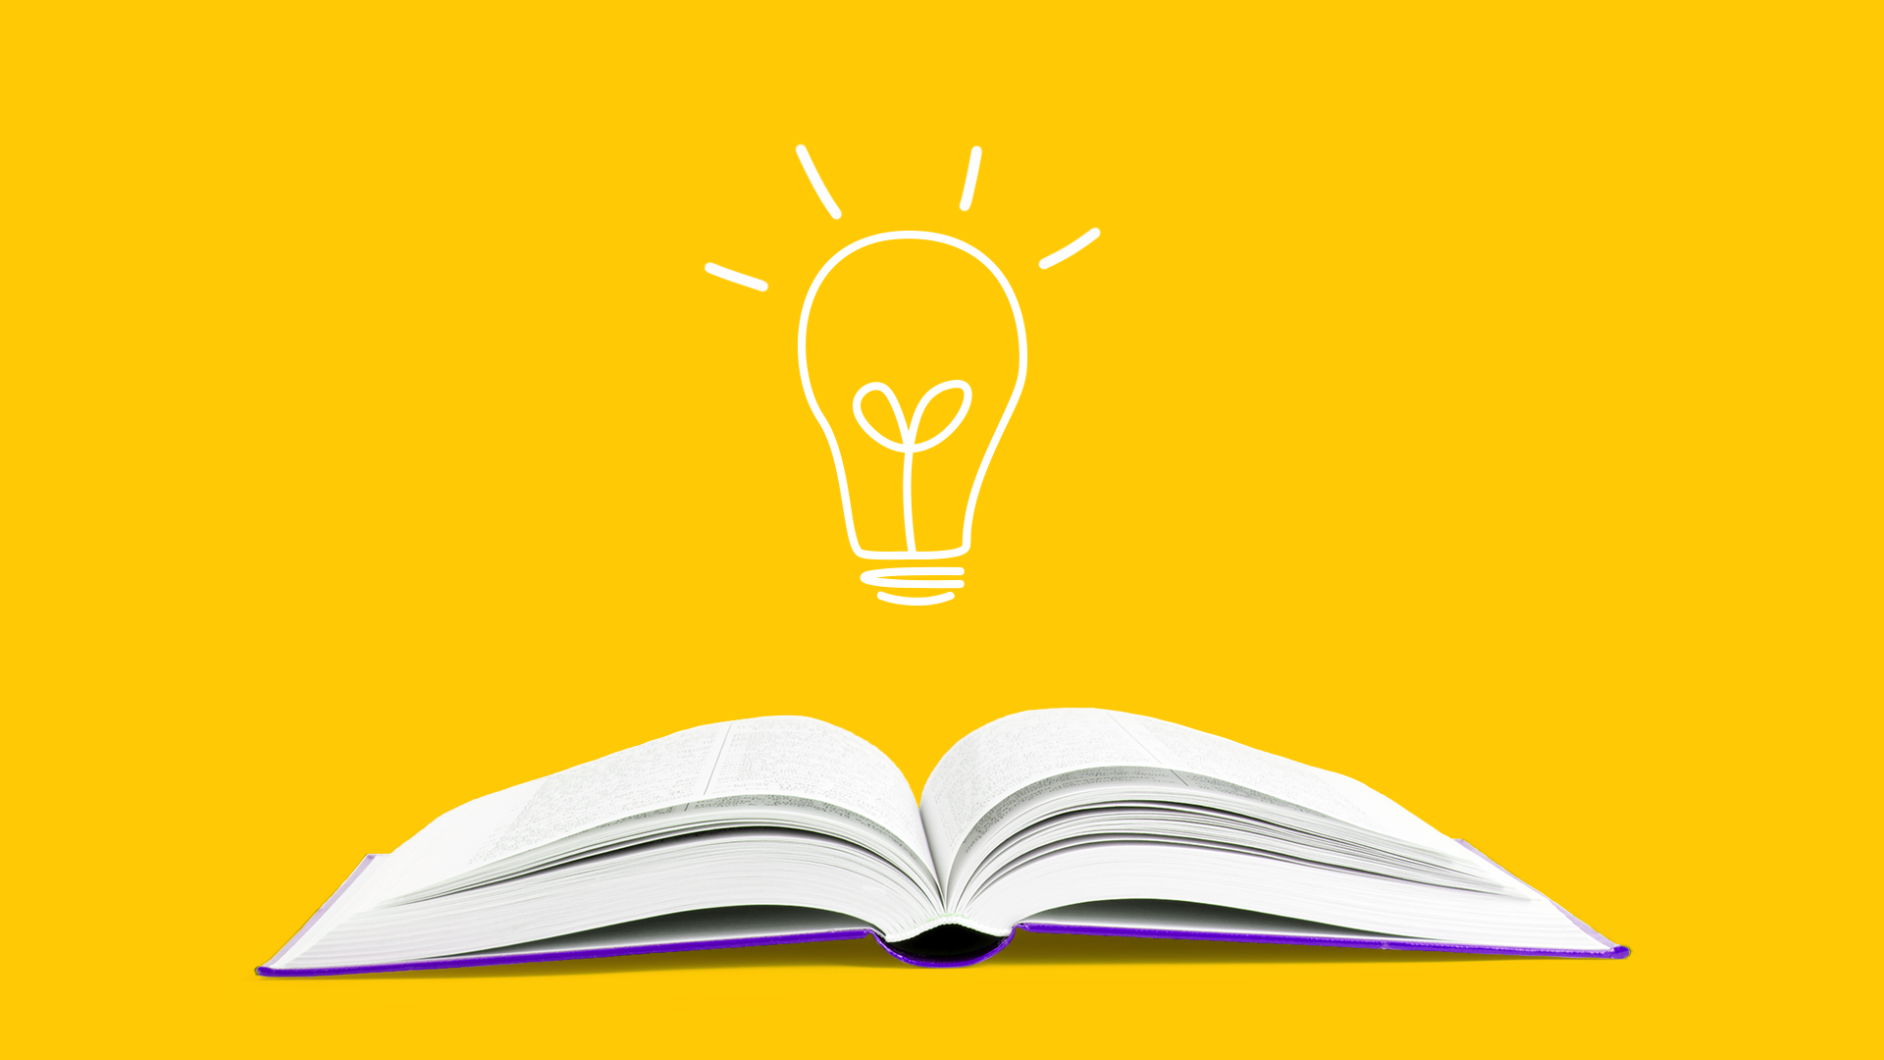 A book and a light bulb represents how pharmacists can improve health literacy